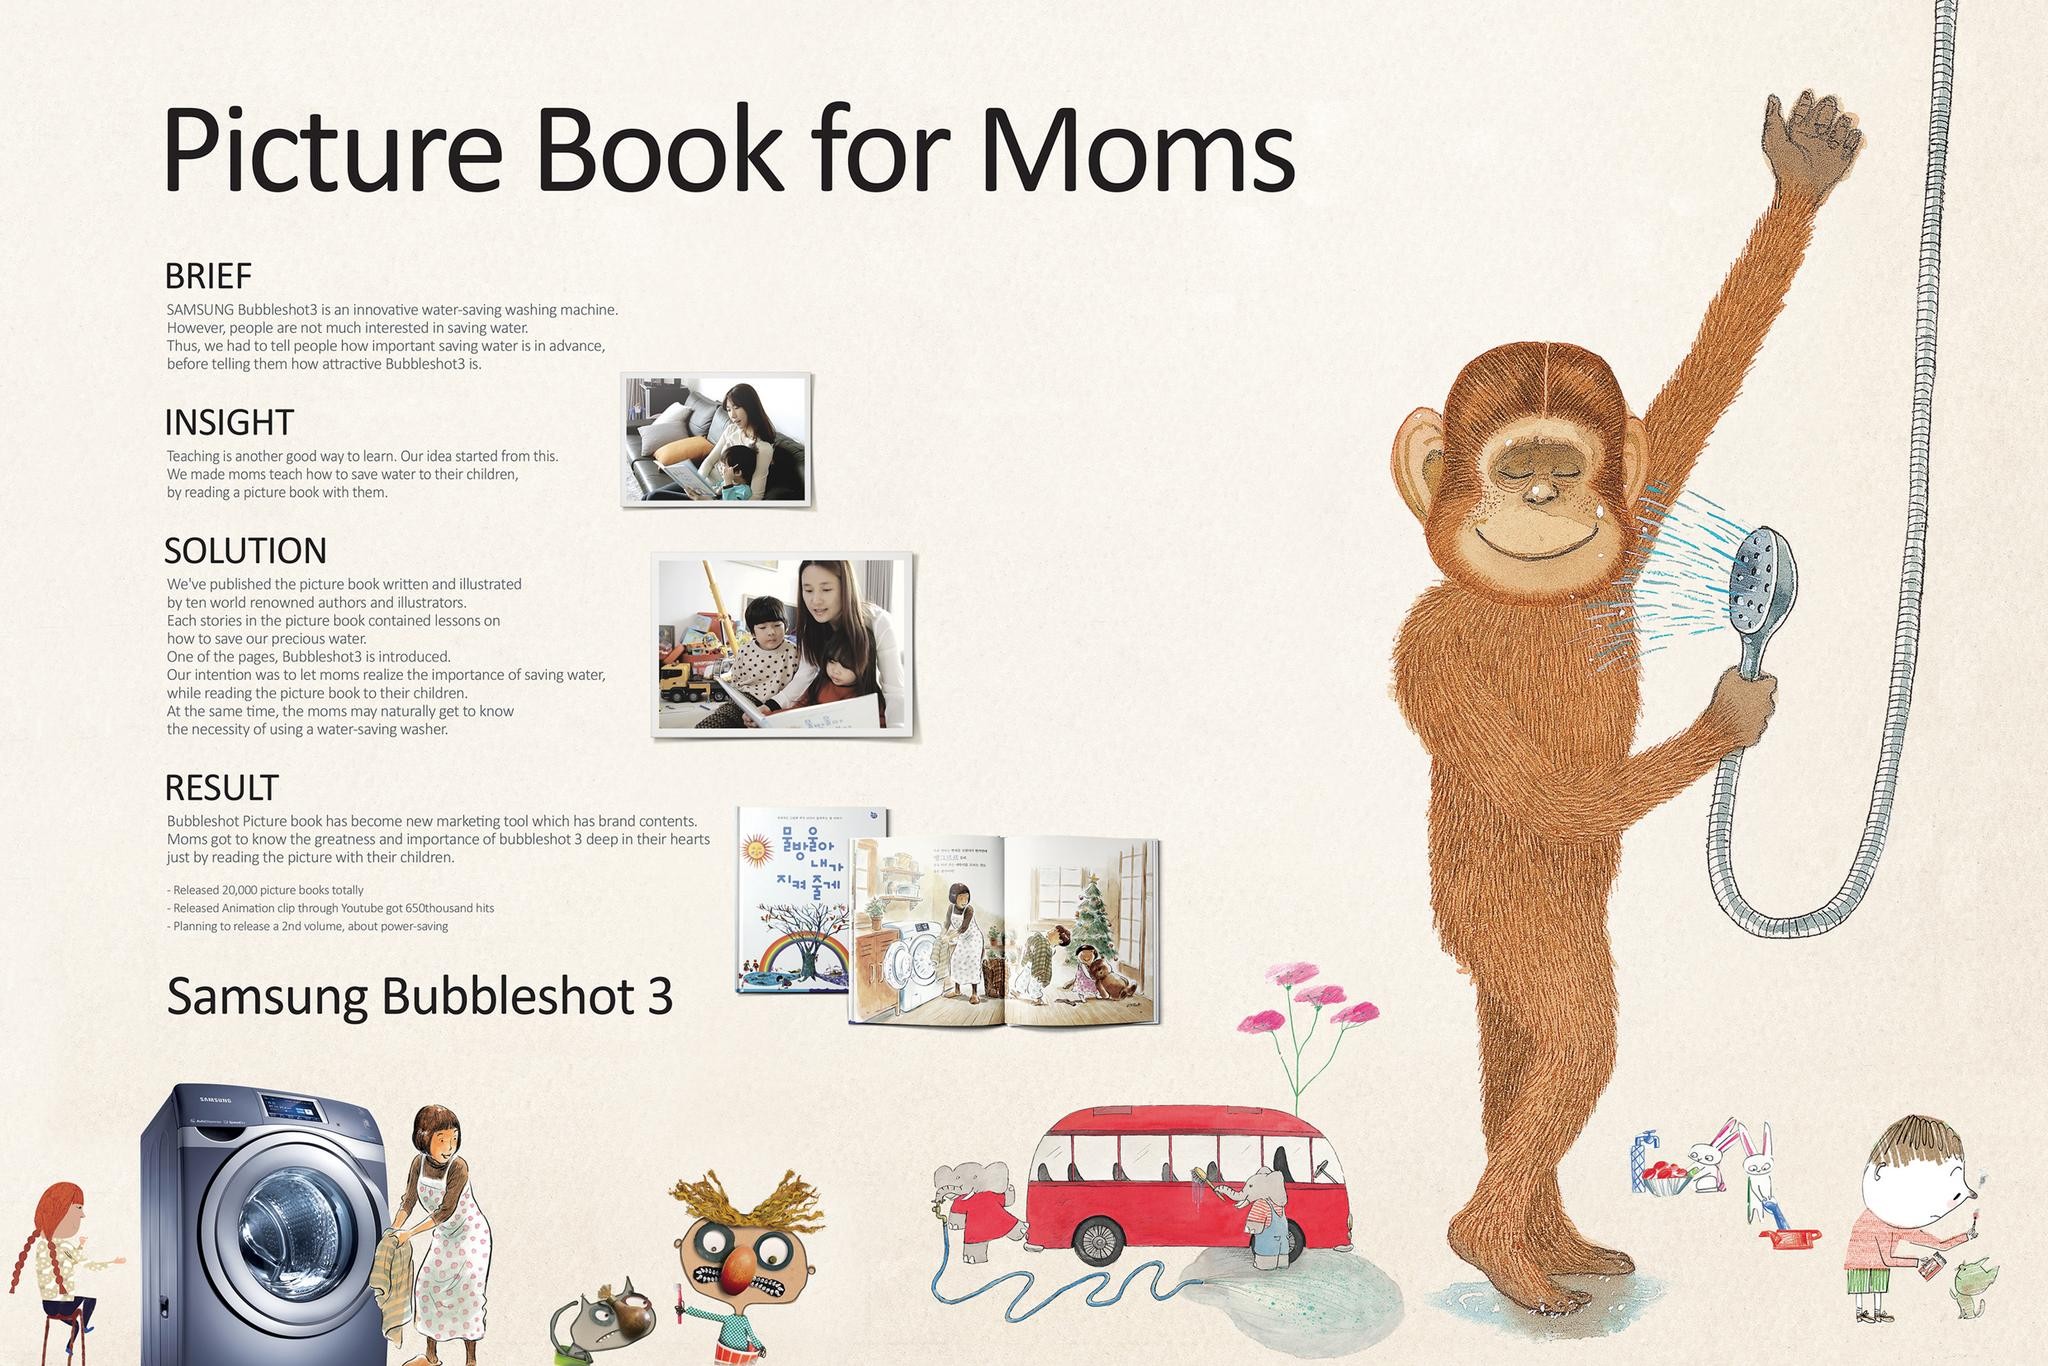 PICTURE BOOK FOR MOMS